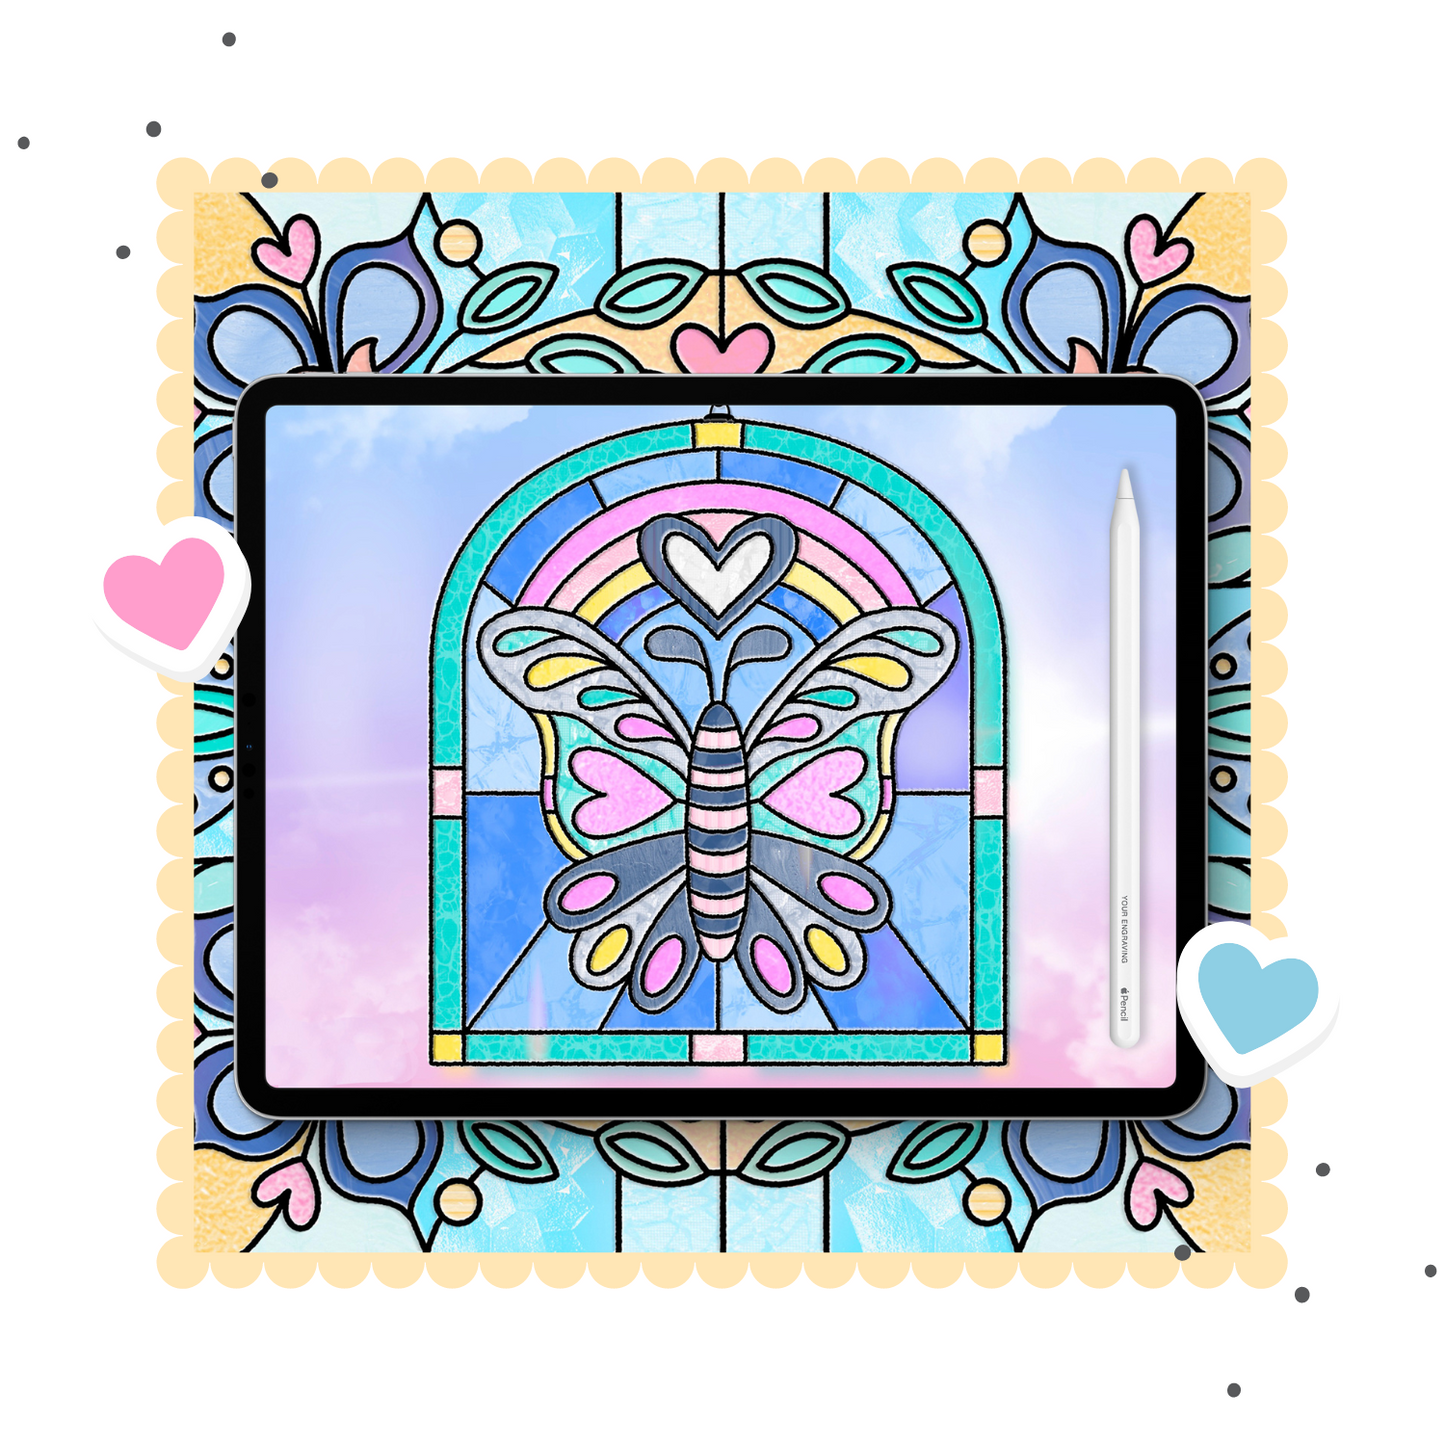 NEW! Stained Glass Art in Procreate